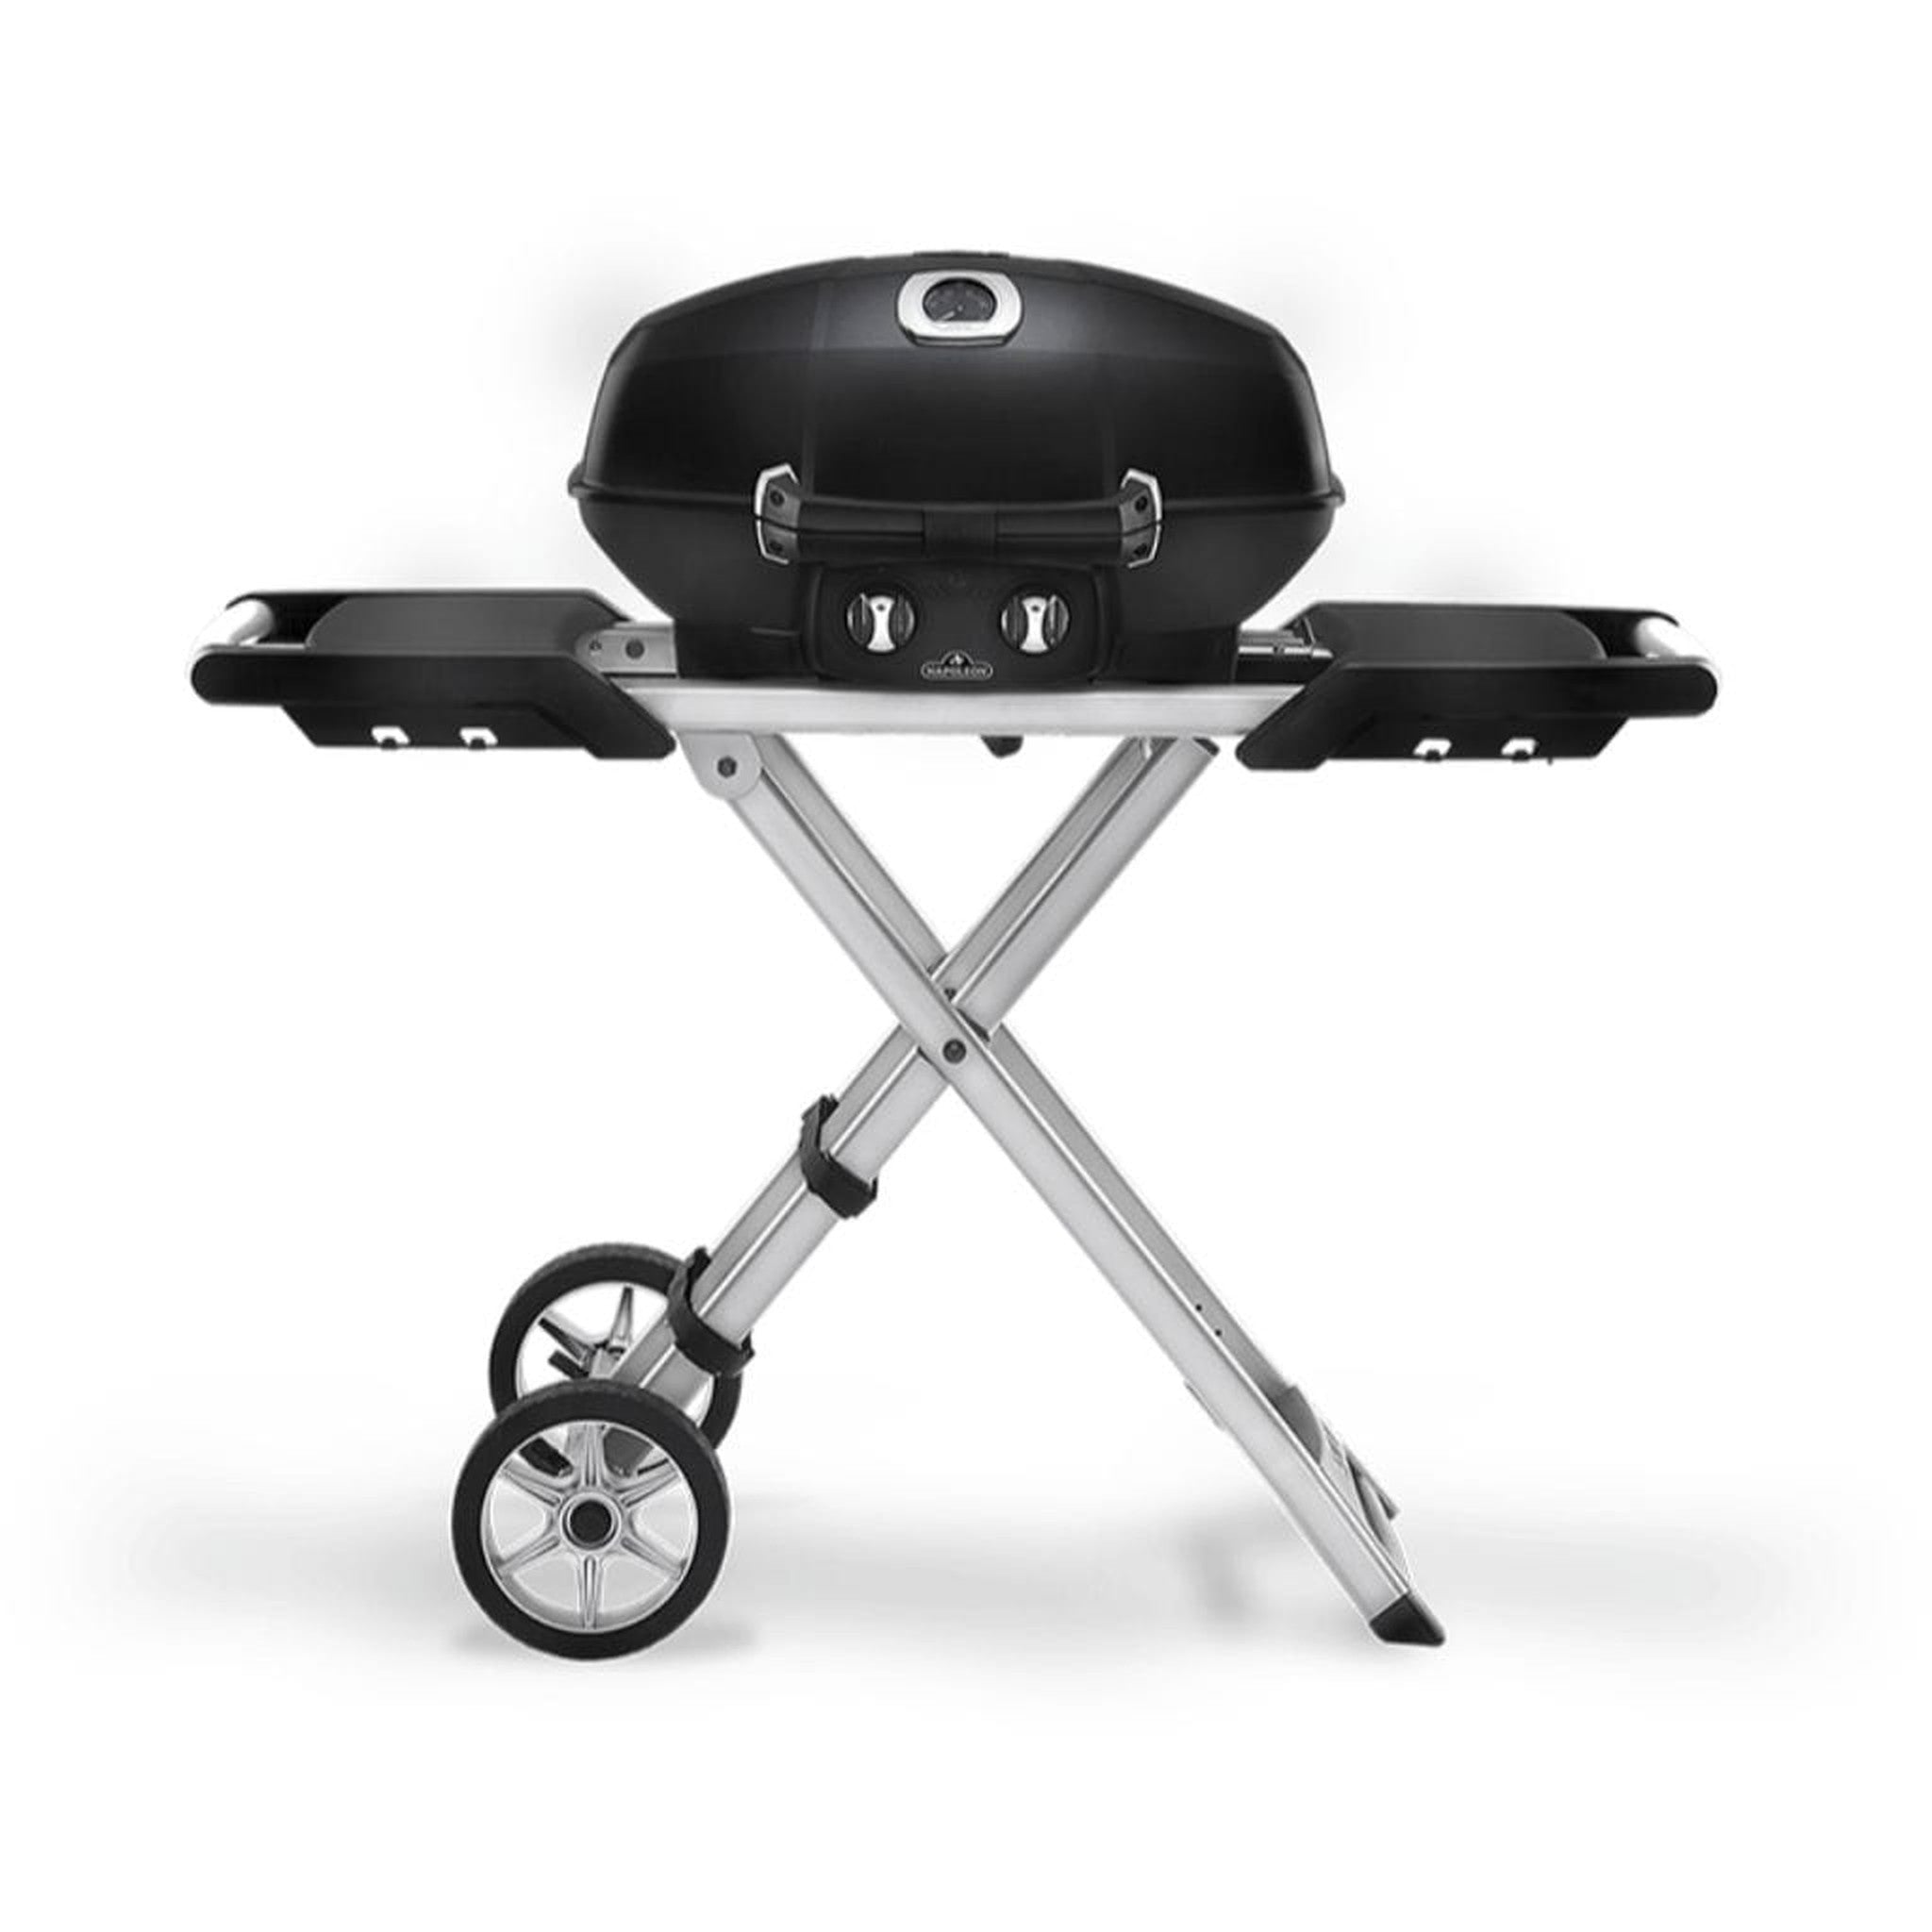 Portable 1600-Watt BBQ Electric Grill in Black withTemperature Control and  Grease Collector